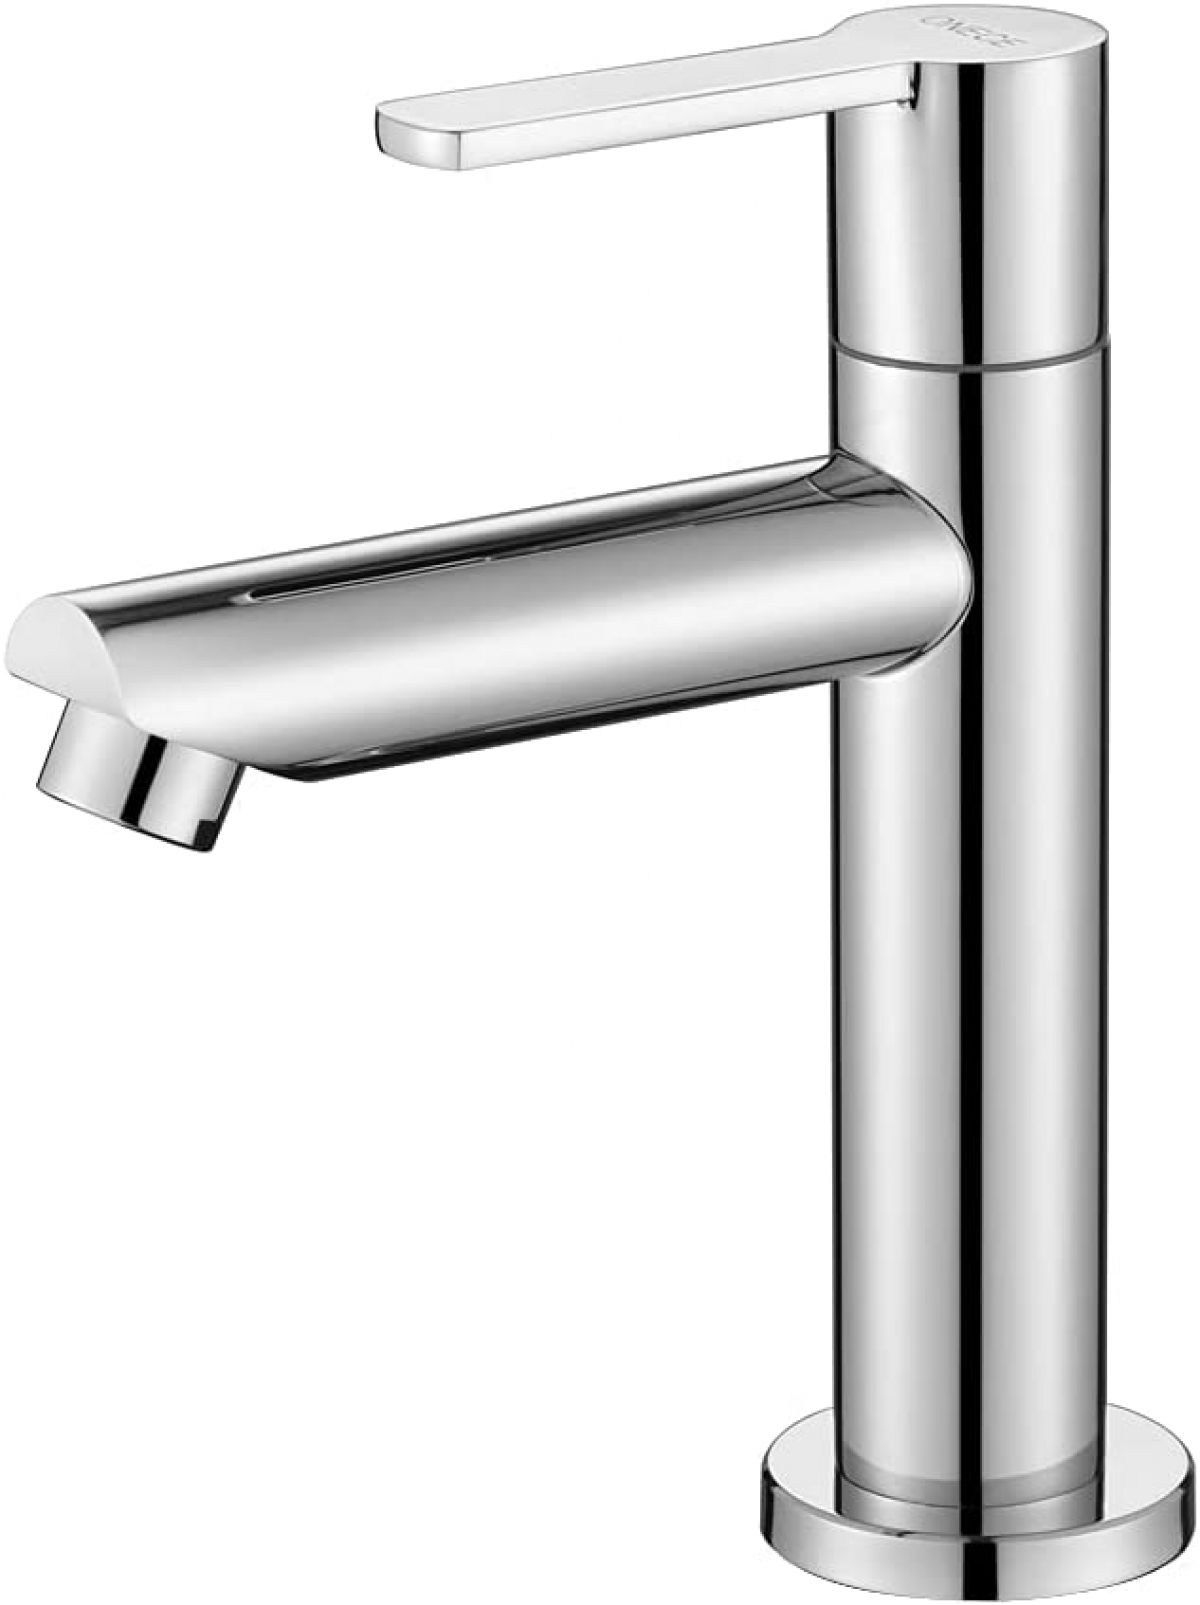 ONECE Cold Water Tap, Chrome